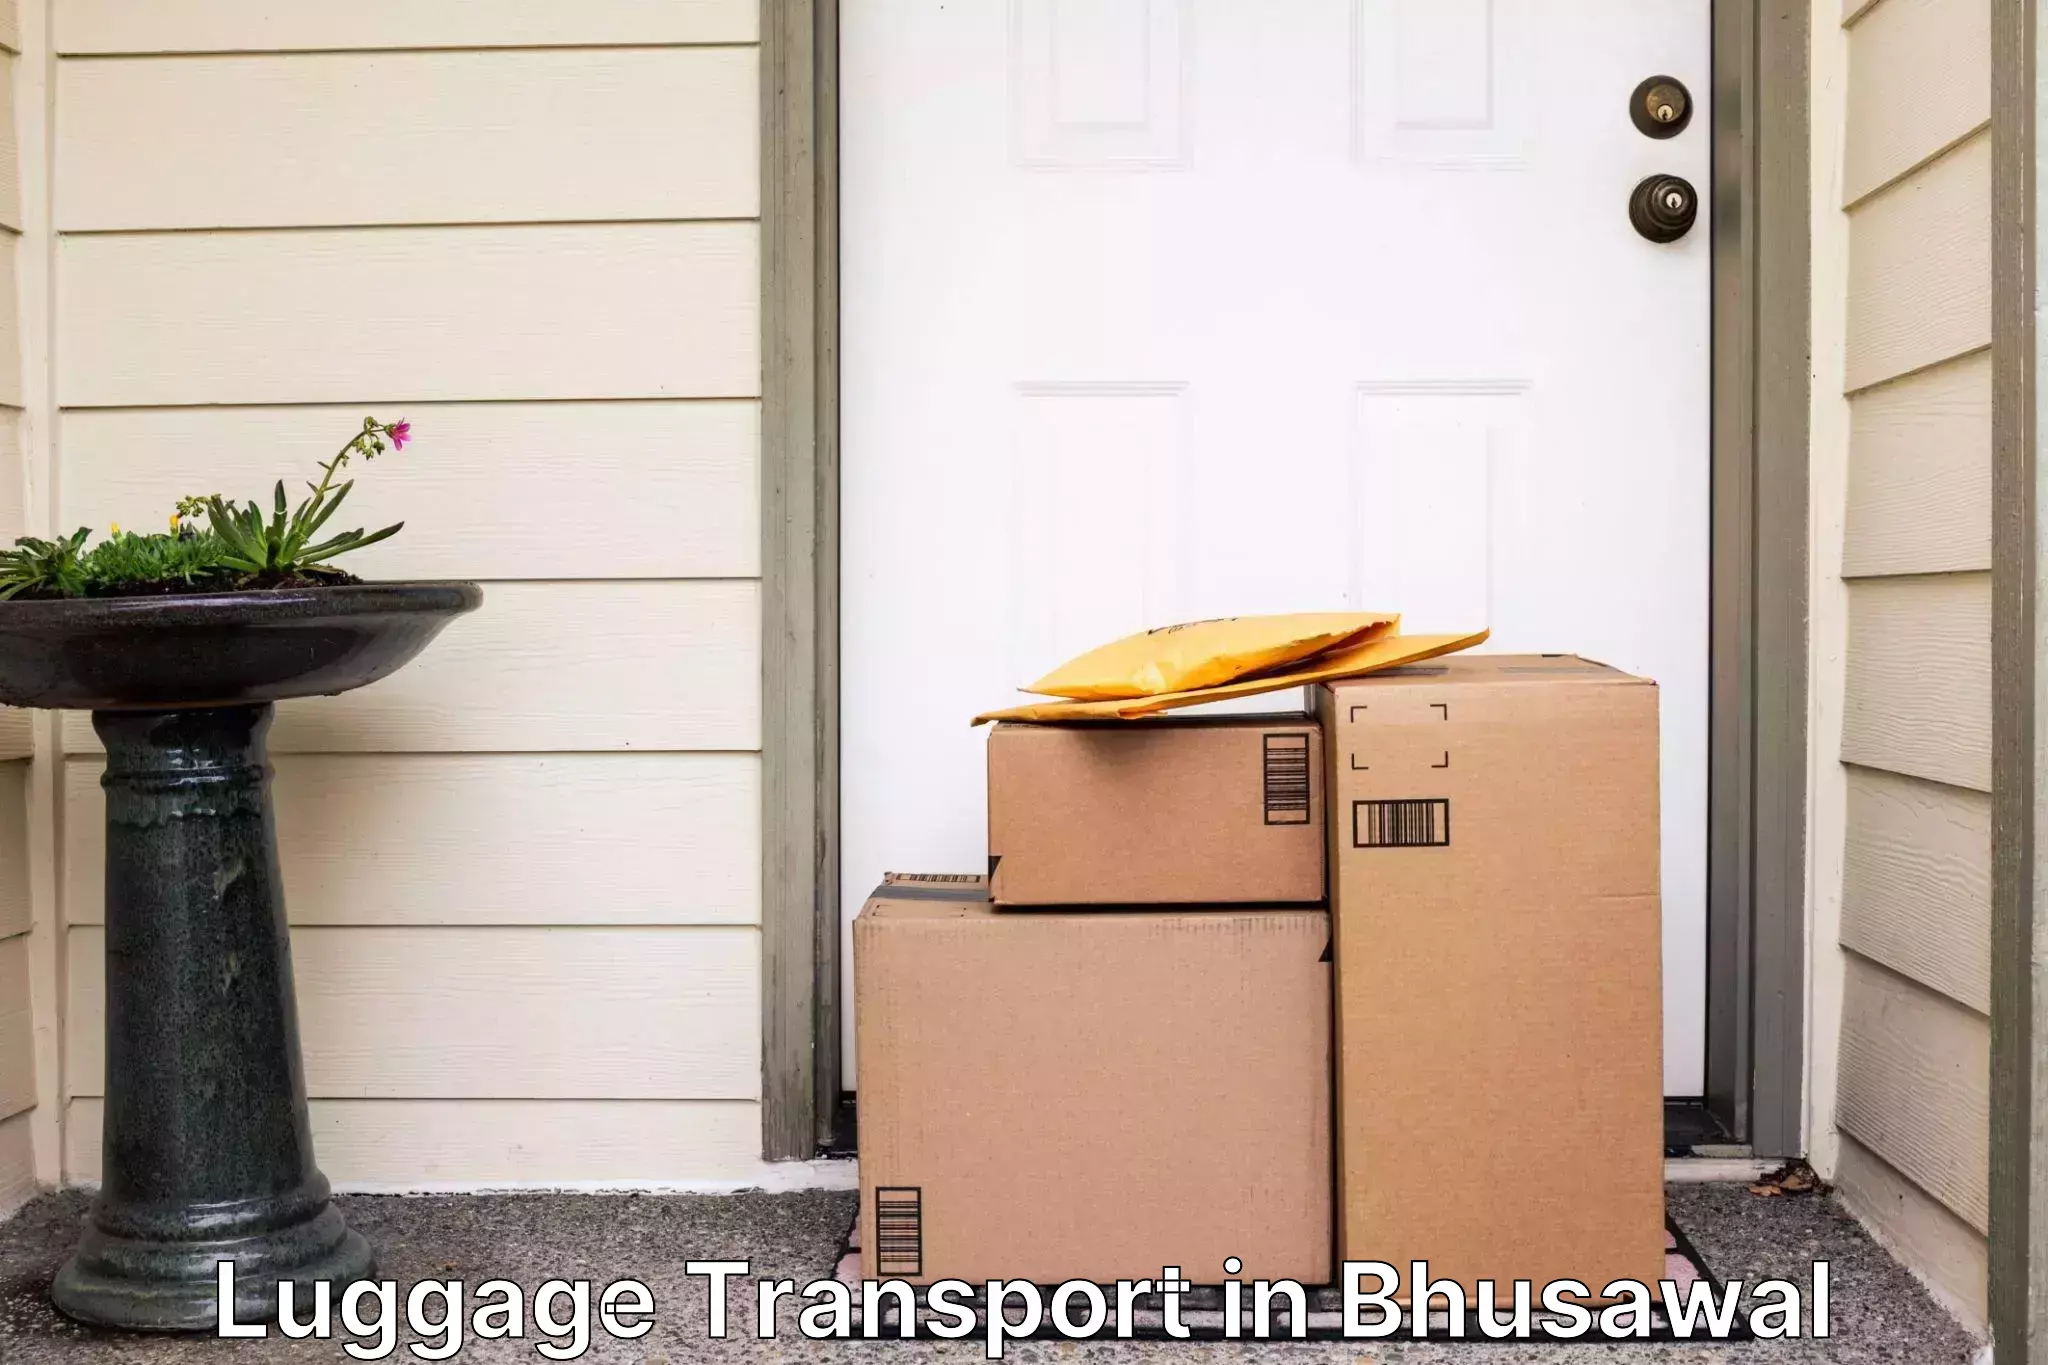 Doorstep luggage collection in Bhusawal